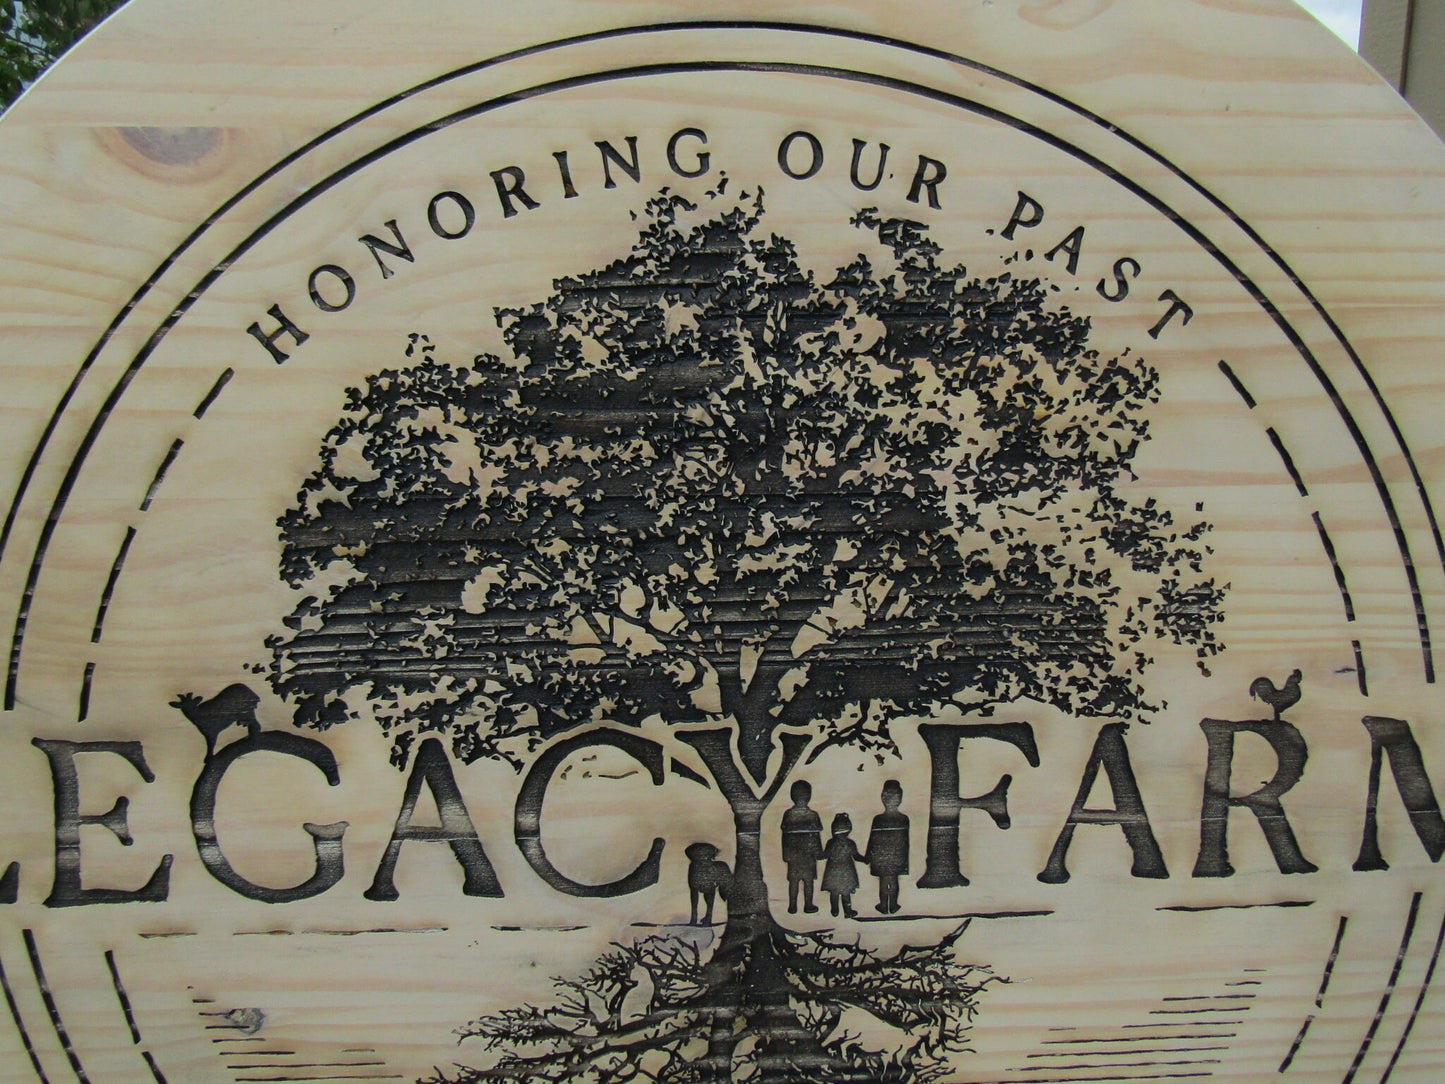 Custom Legacy Farm Carved Engraved Routed Color Filled Business Commerical Signage Your Logo Handmade Tree Oversized Pine Wood Round Sign